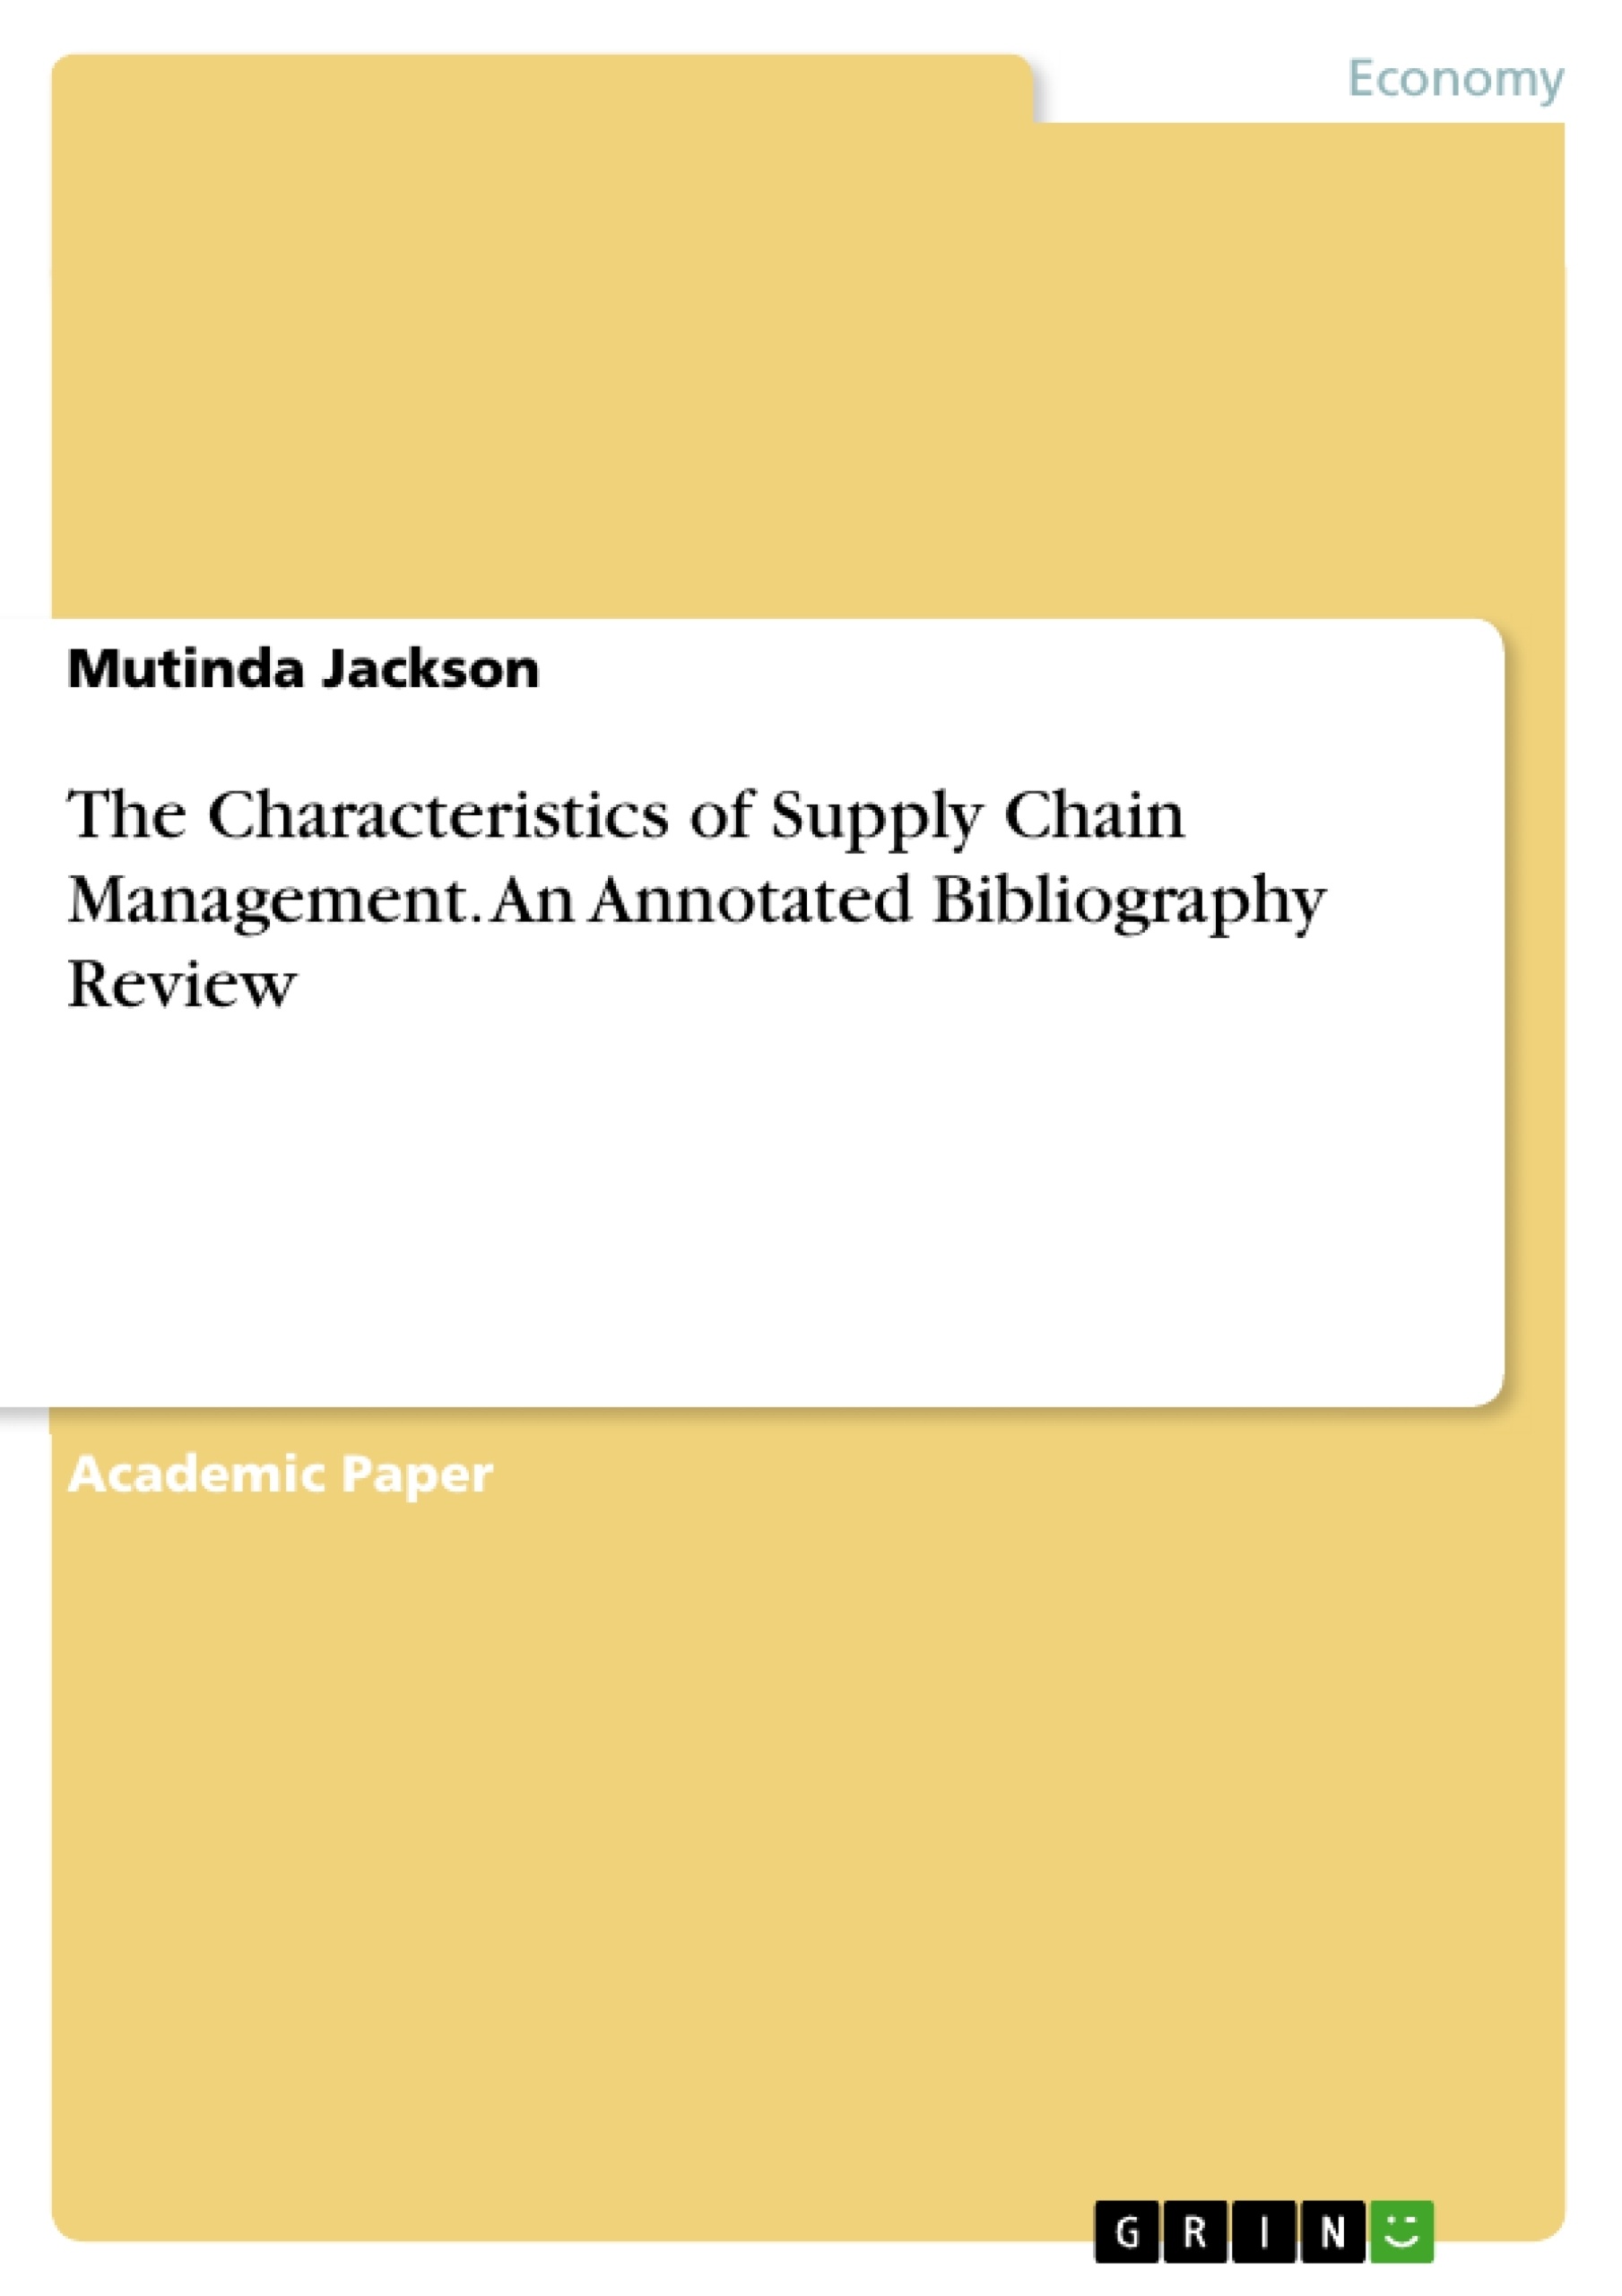 Título: The Characteristics of Supply Chain Management. An Annotated Bibliography Review